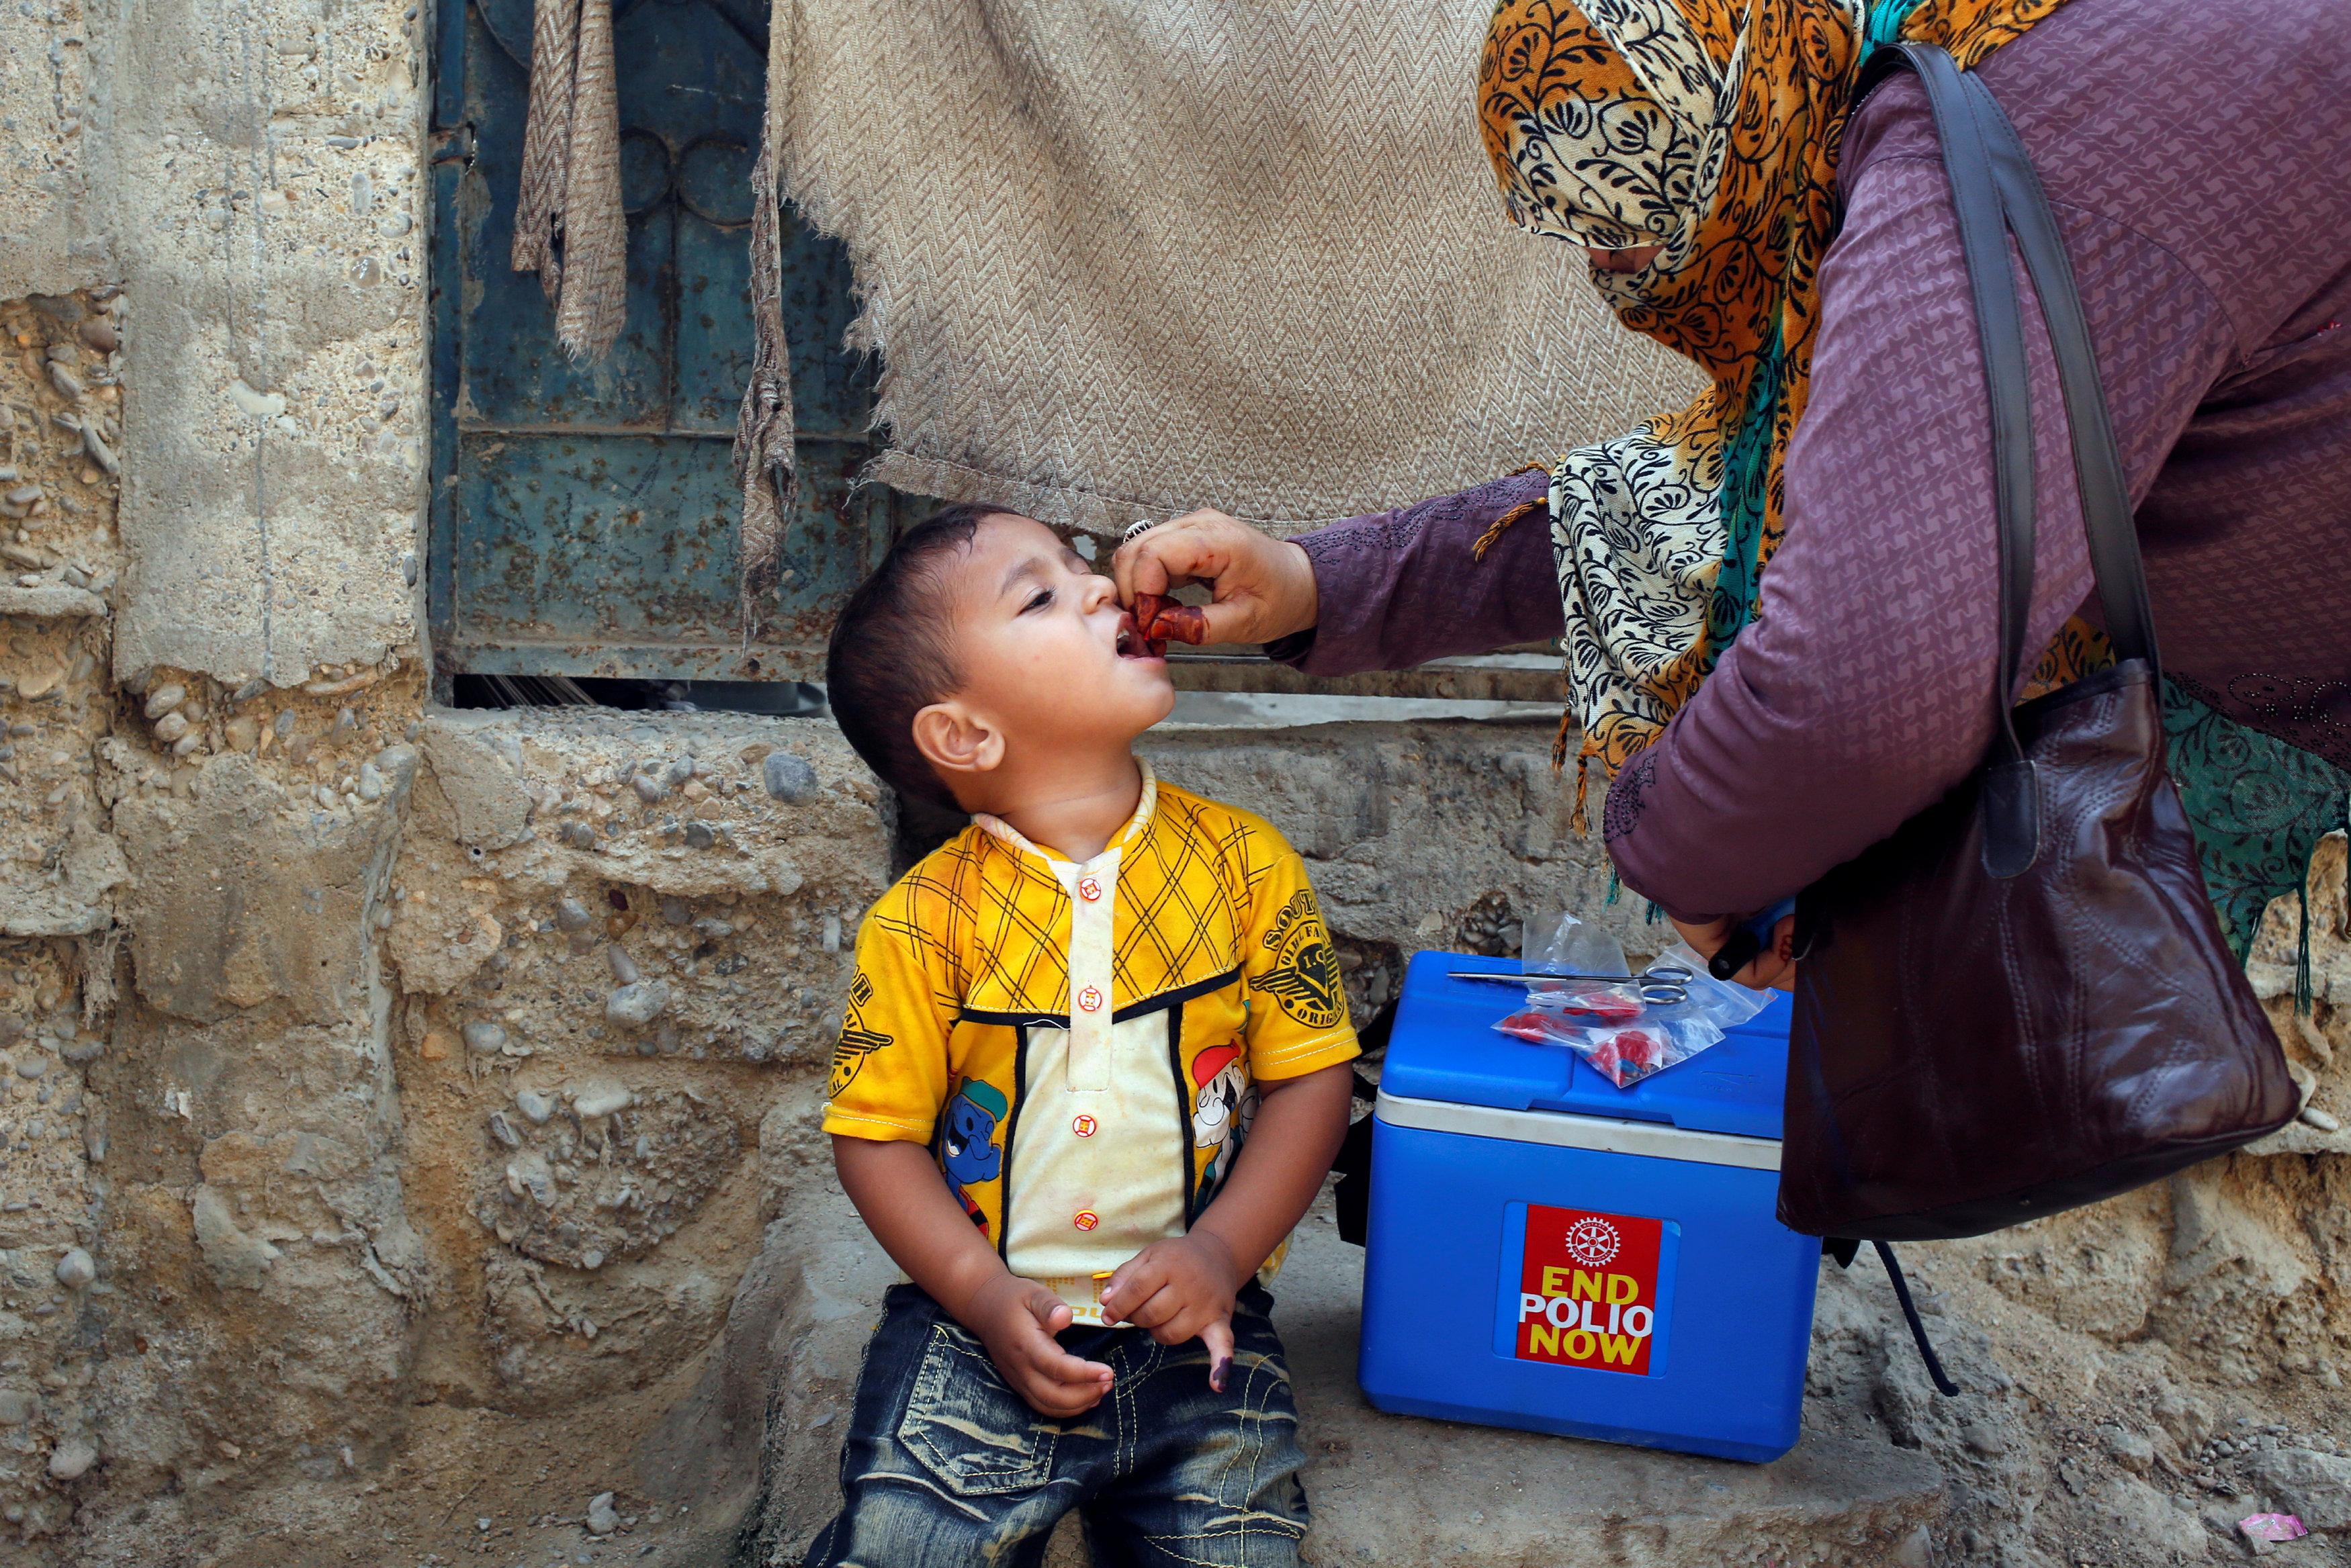 a polio worker is administering drops to a child photo online